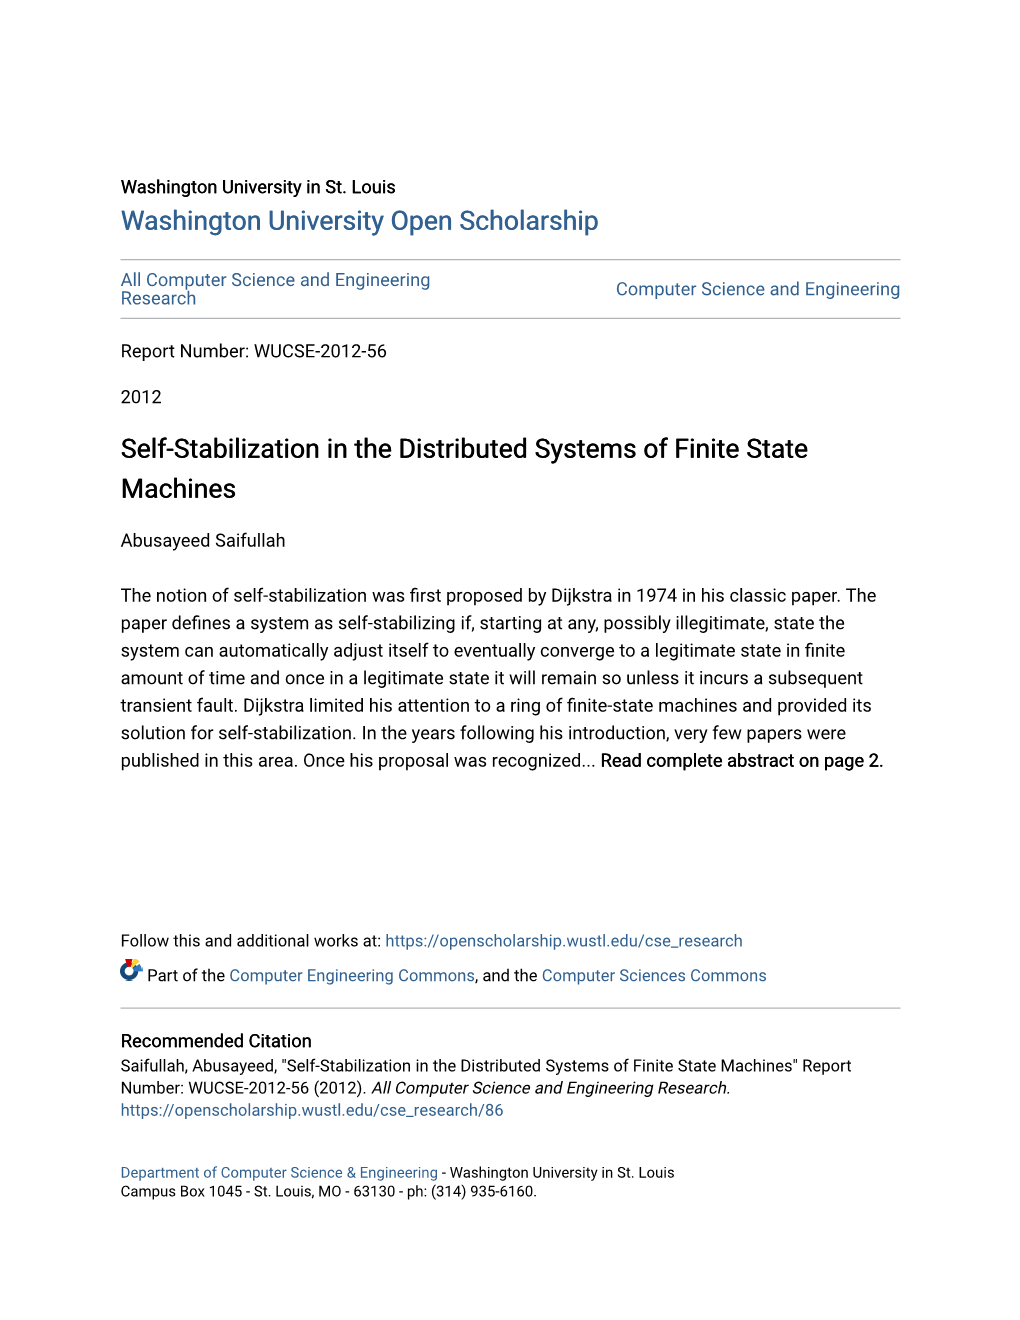 Self-Stabilization in the Distributed Systems of Finite State Machines